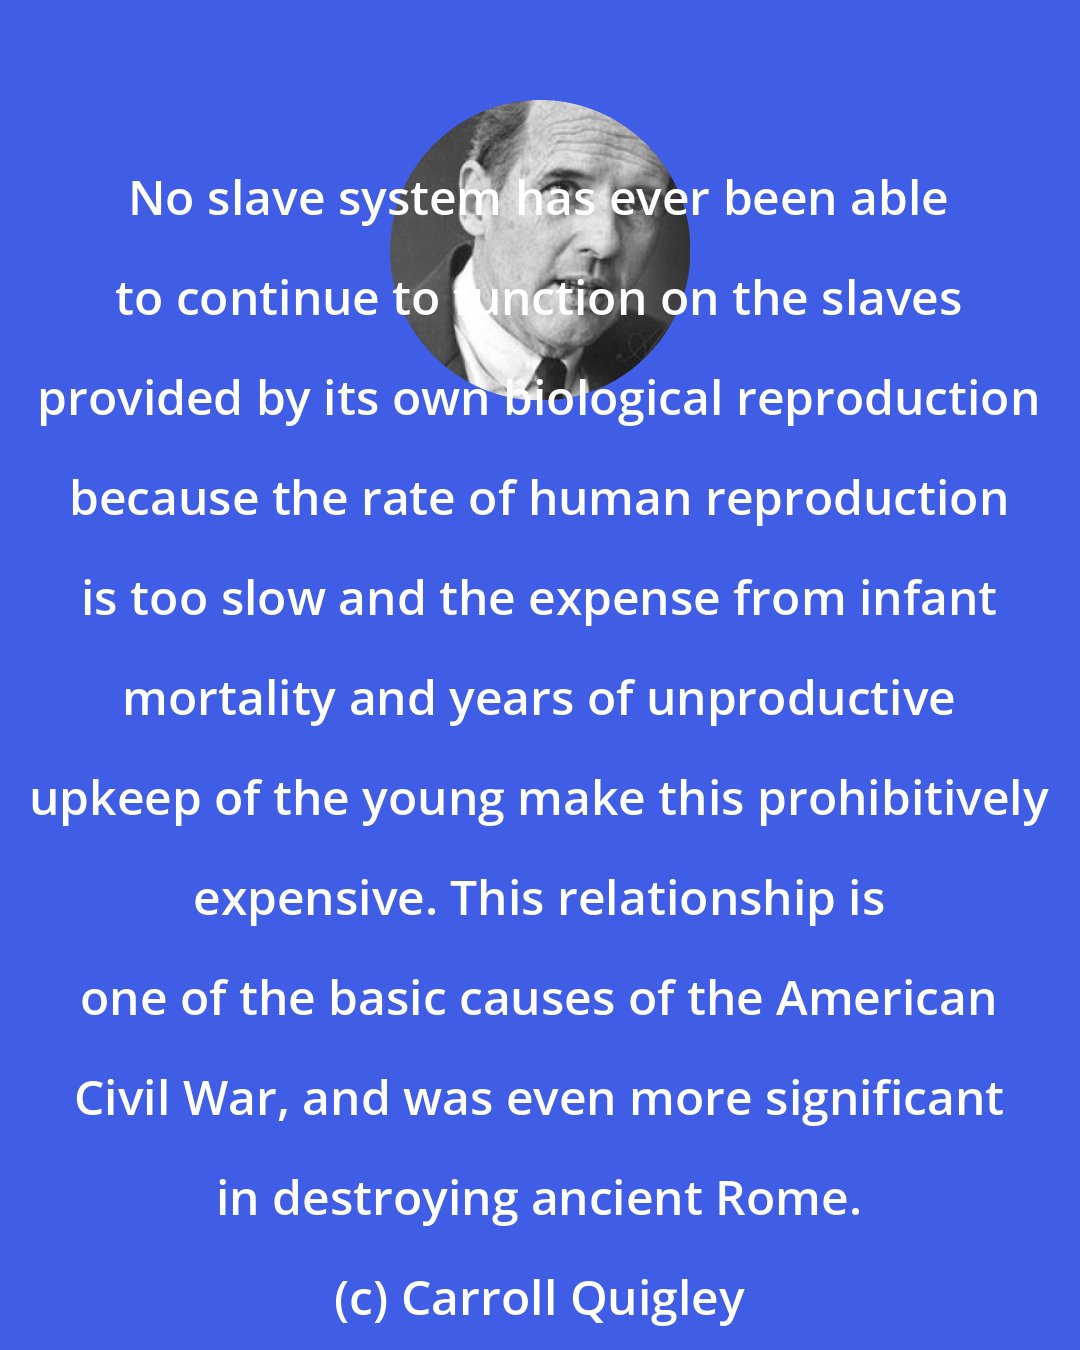 Carroll Quigley: No slave system has ever been able to continue to function on the slaves provided by its own biological reproduction because the rate of human reproduction is too slow and the expense from infant mortality and years of unproductive upkeep of the young make this prohibitively expensive. This relationship is one of the basic causes of the American Civil War, and was even more significant in destroying ancient Rome.